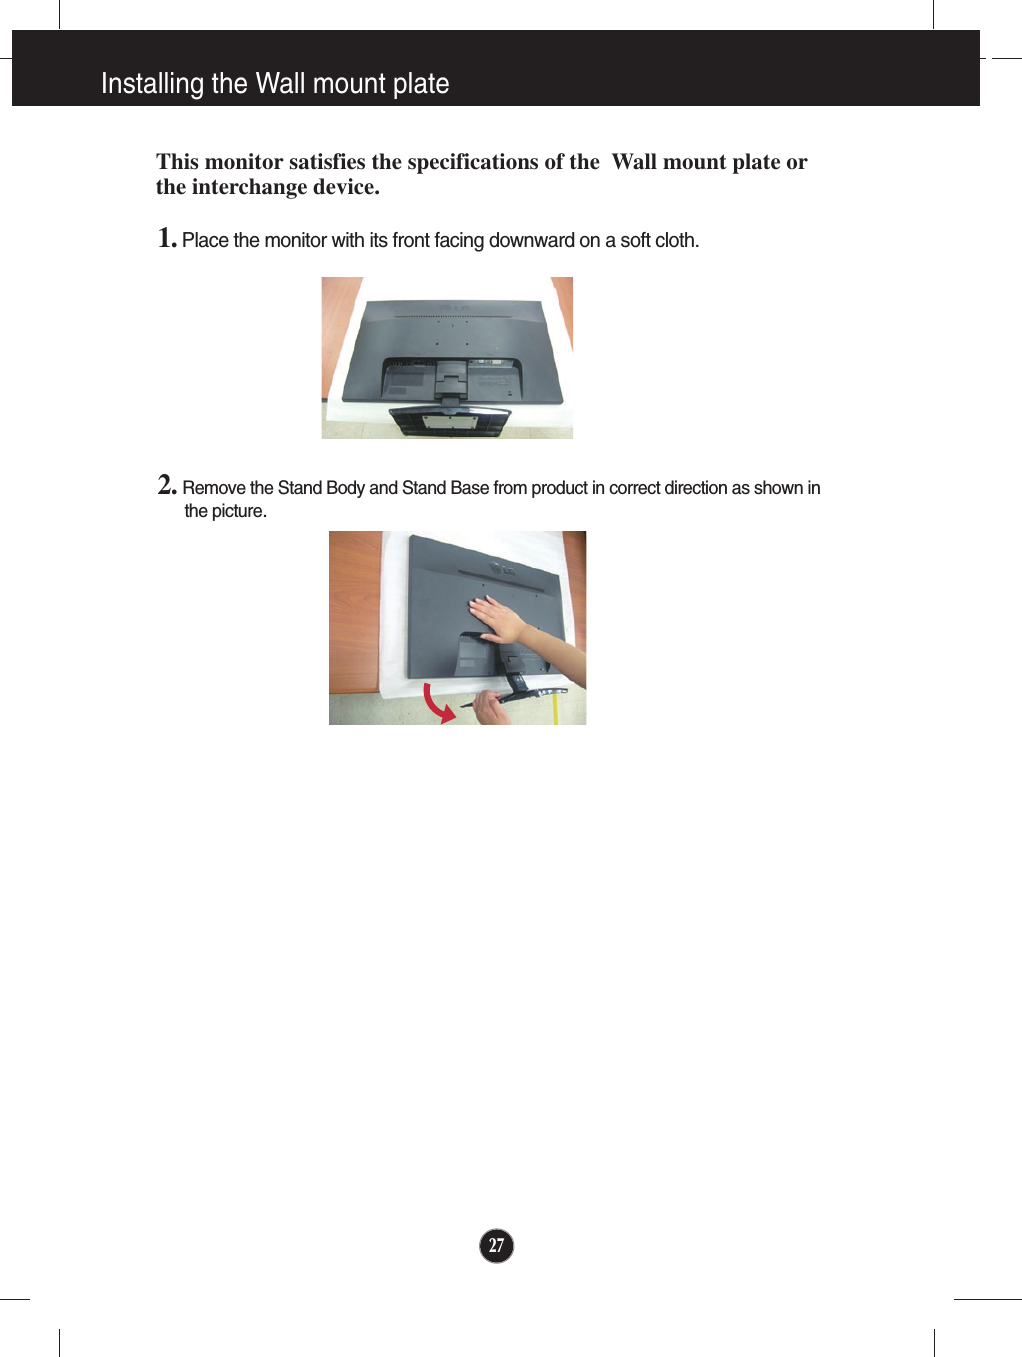 271. Place the monitor with its front facing downward on a soft cloth.2. Remove the Stand Body and Stand Base from product in correct direction as shown inthe picture.Installing the Wall mount plateThis monitor satisfies the specifications of the  Wall mount plate orthe interchange device.